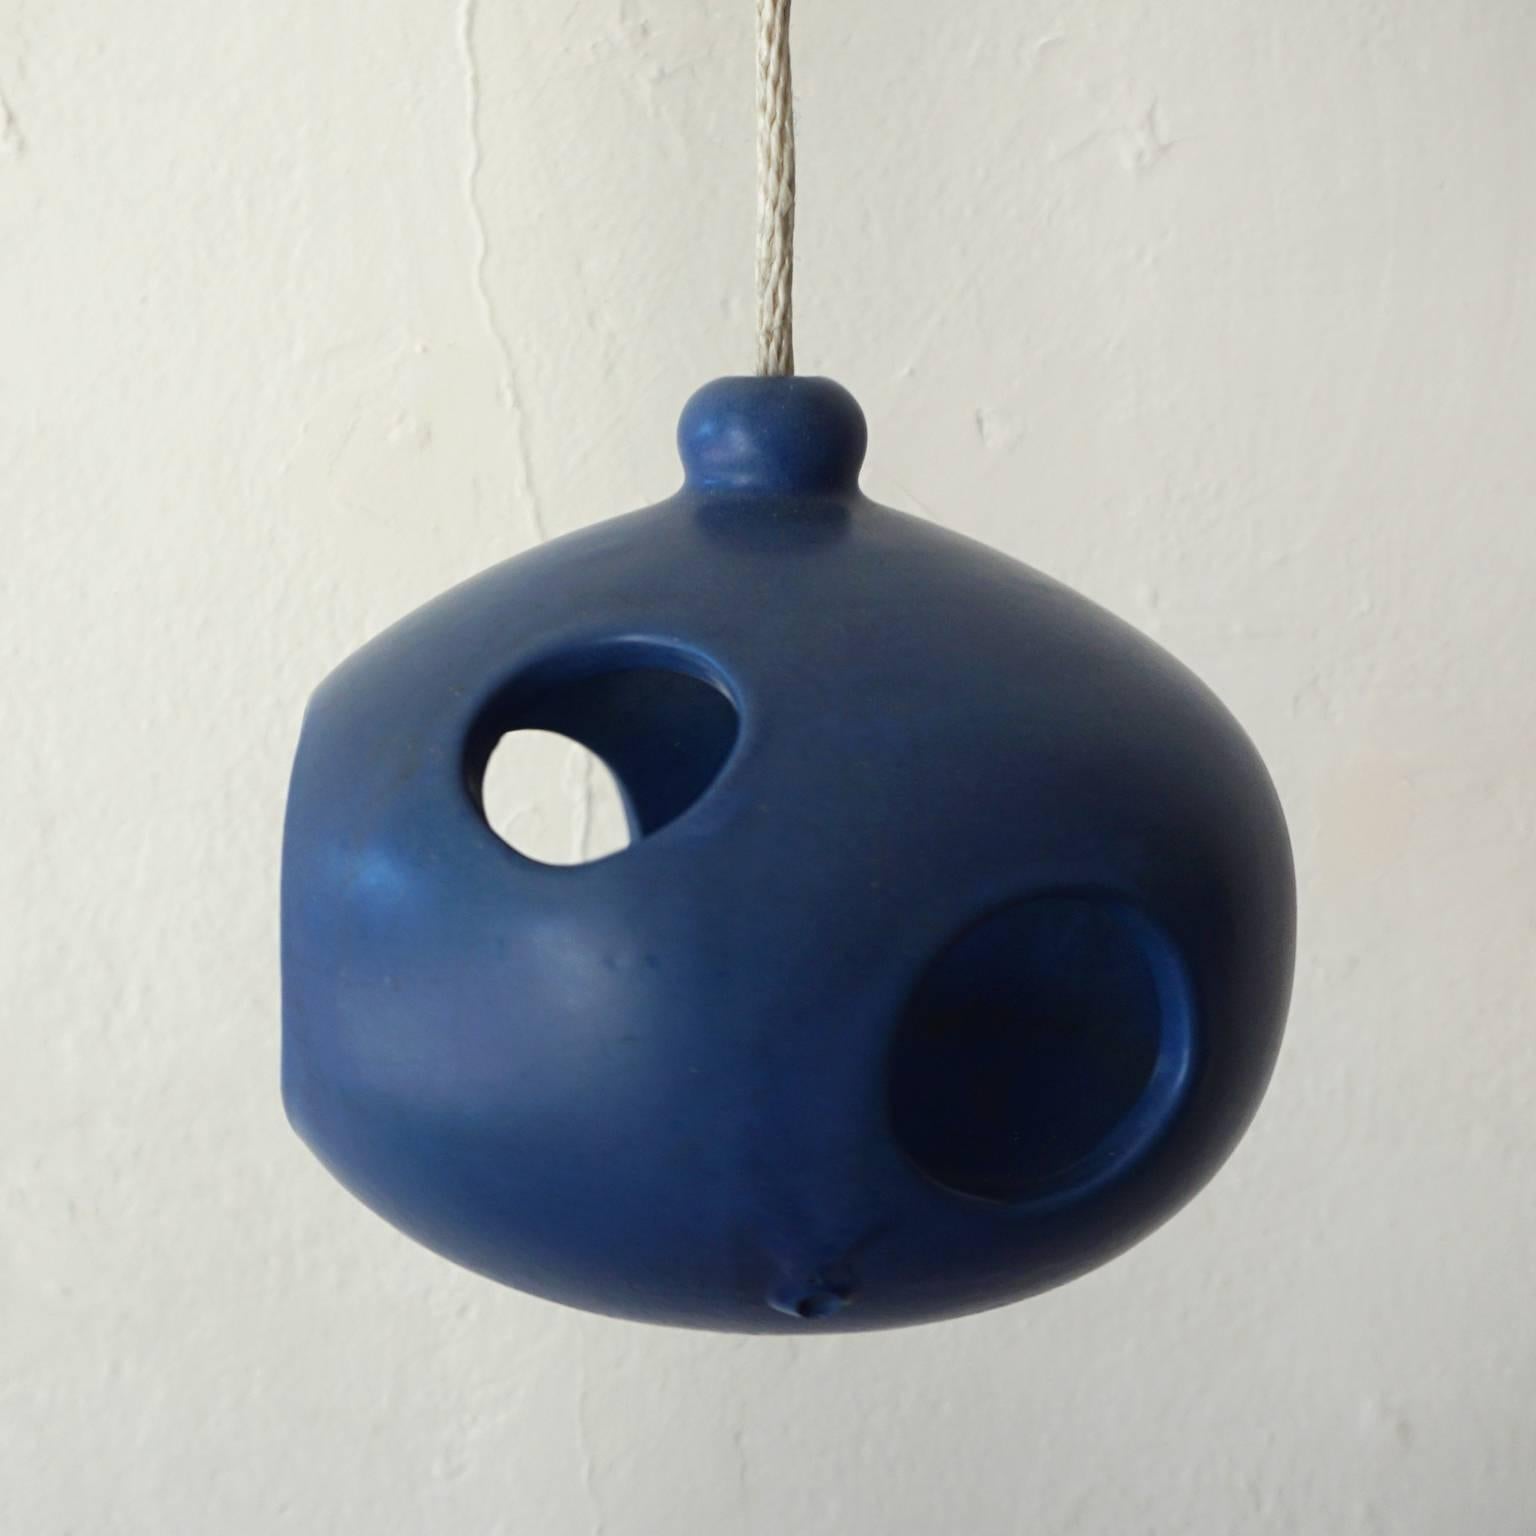 American Hanging Lantern by Aurilla Doener for Architectural Pottery